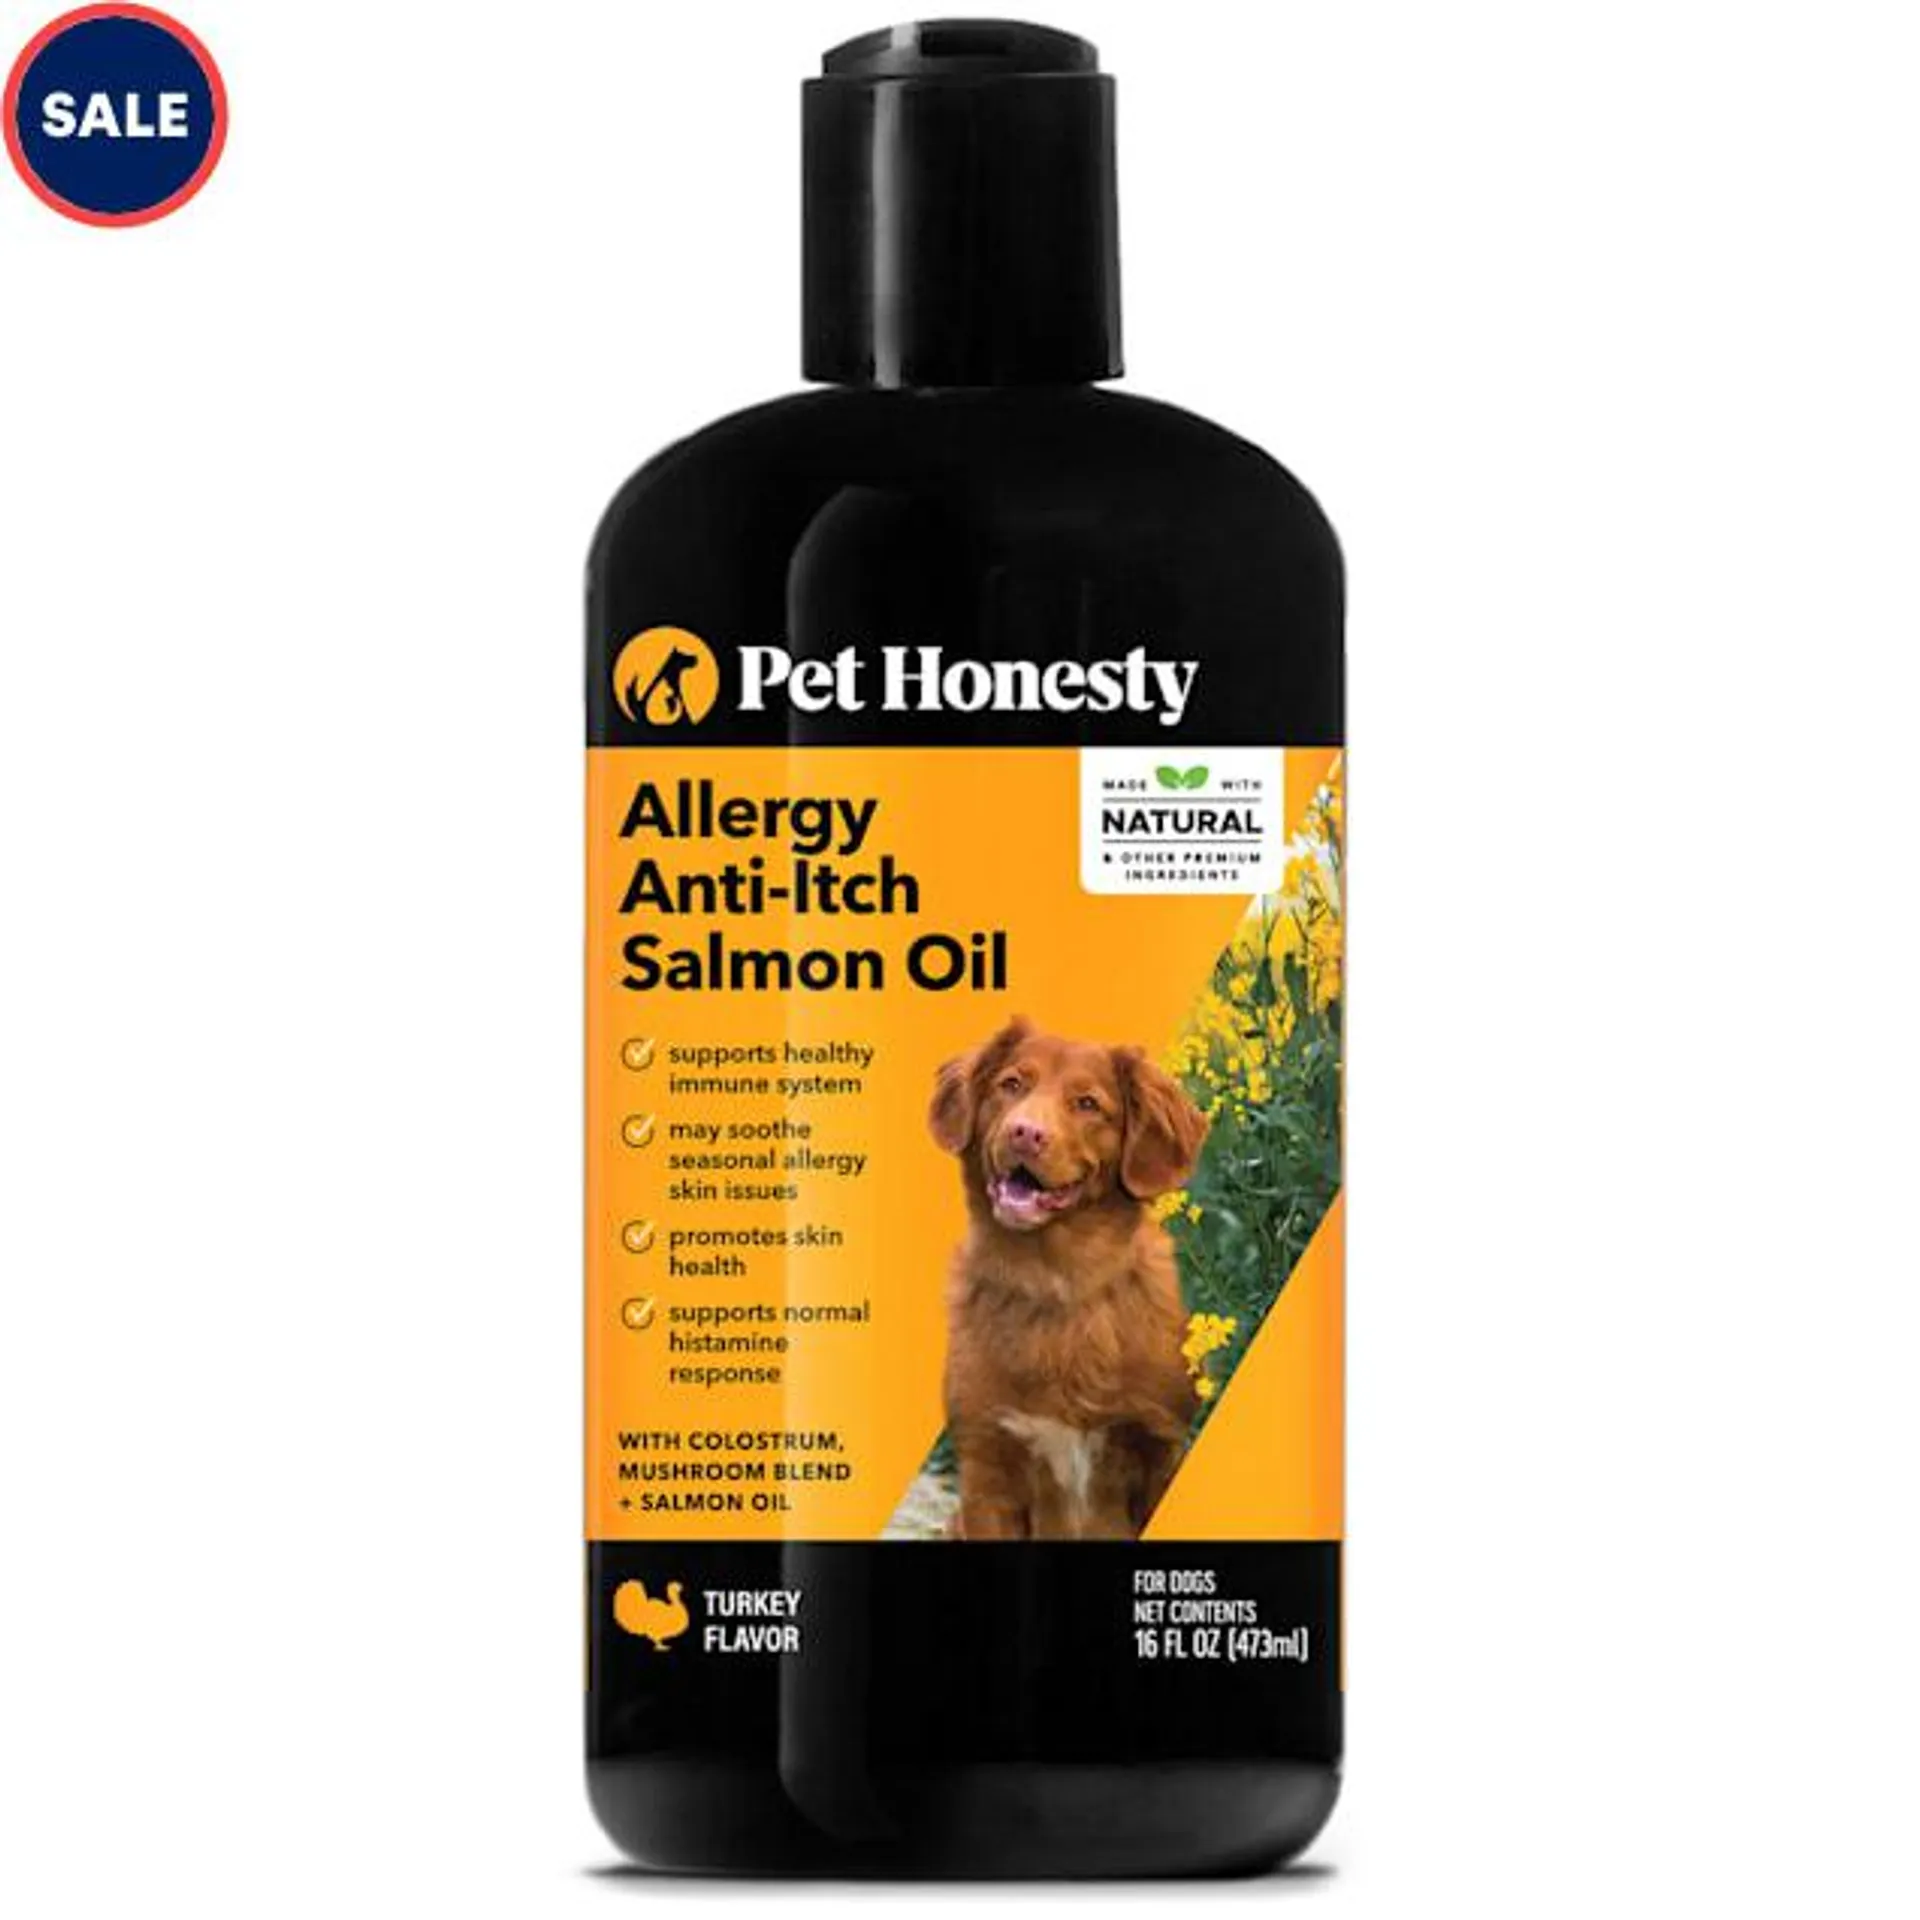 Pet Honesty Allergy Anti-Itch Salmon Oil Liquid Supplement for Dogs, 16 fl. oz.